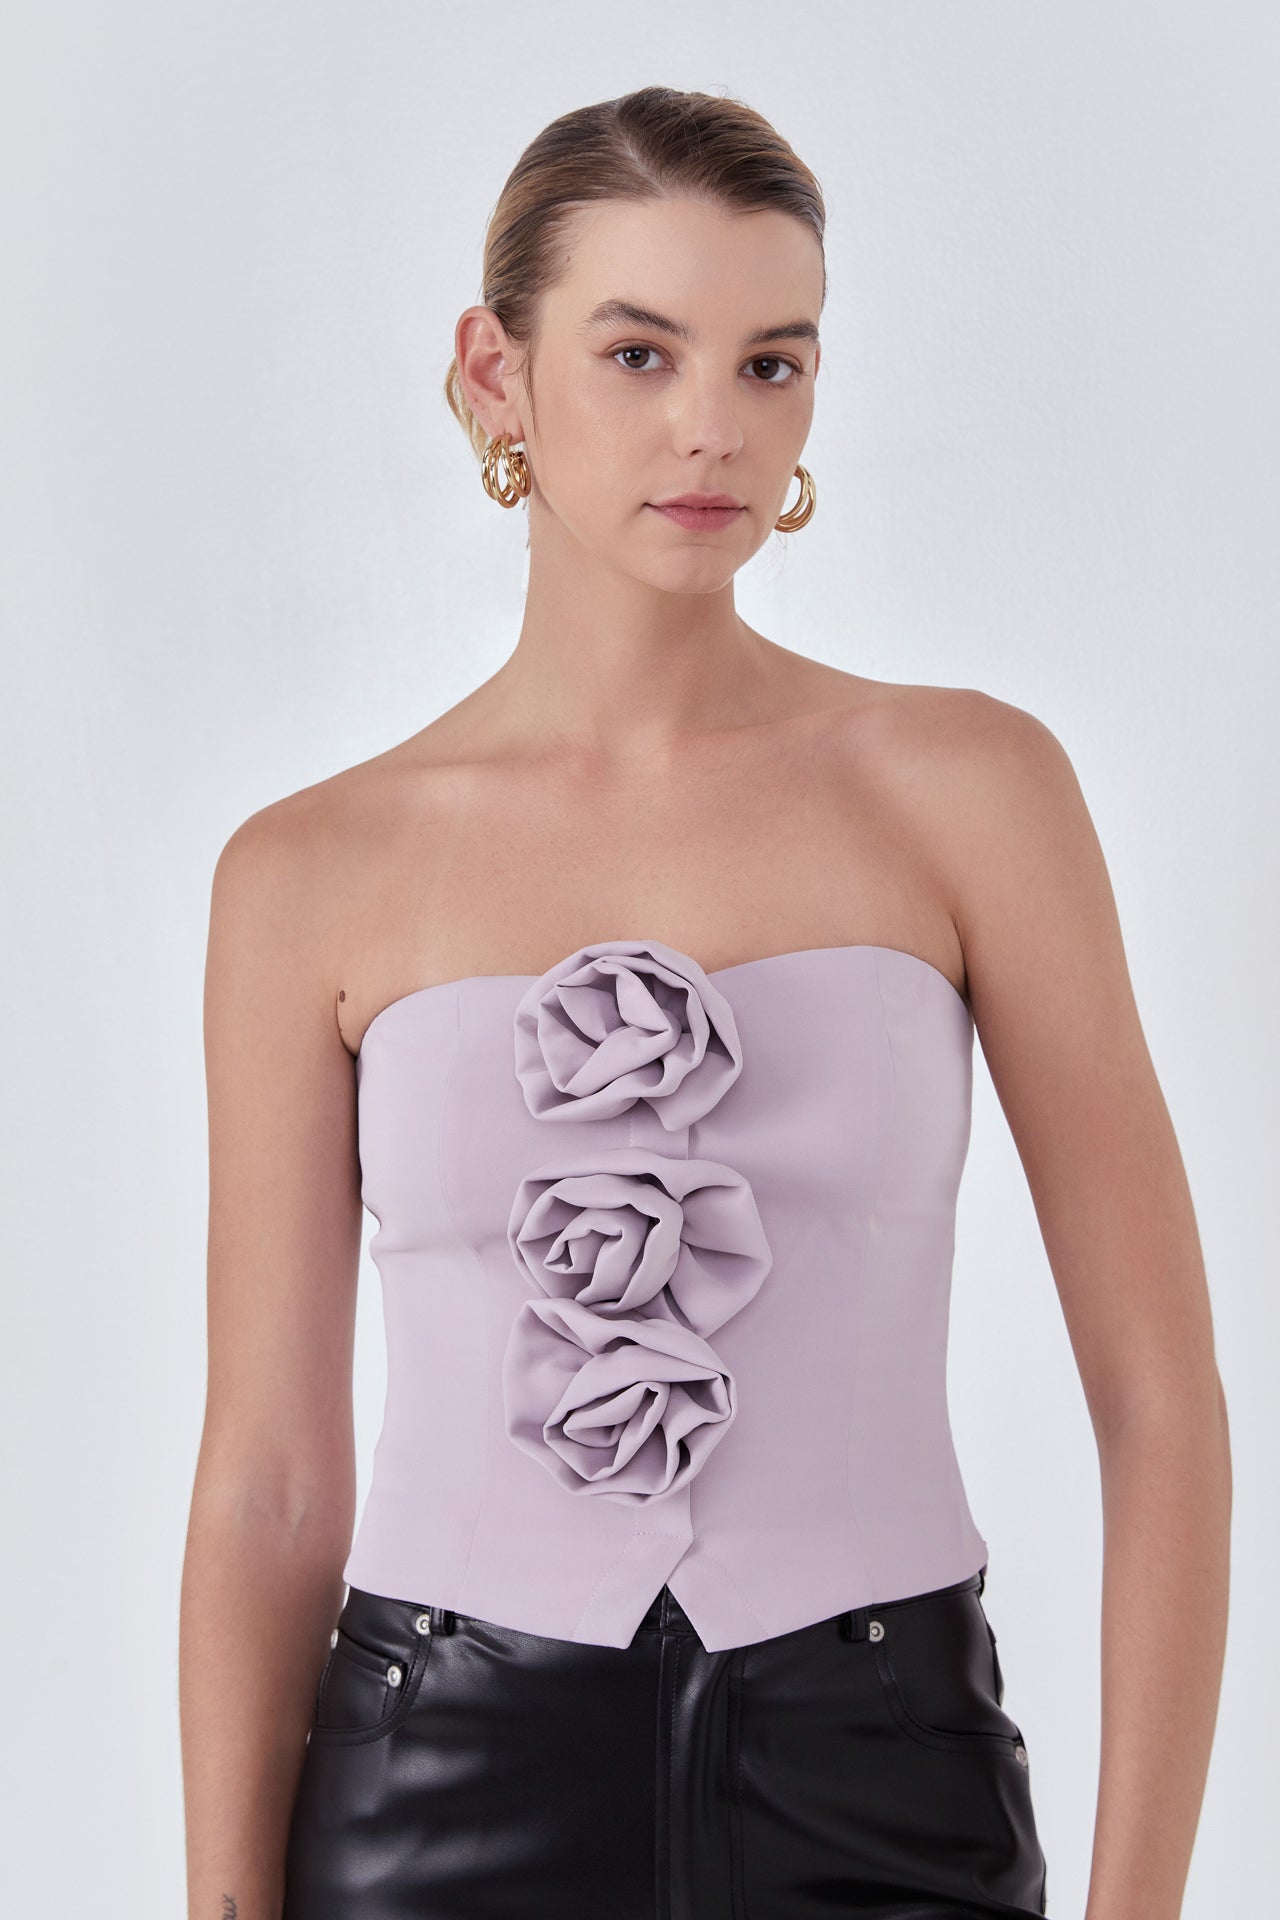 ENDLESS ROSE - Strapless Rose Top - TOPS available at Objectrare